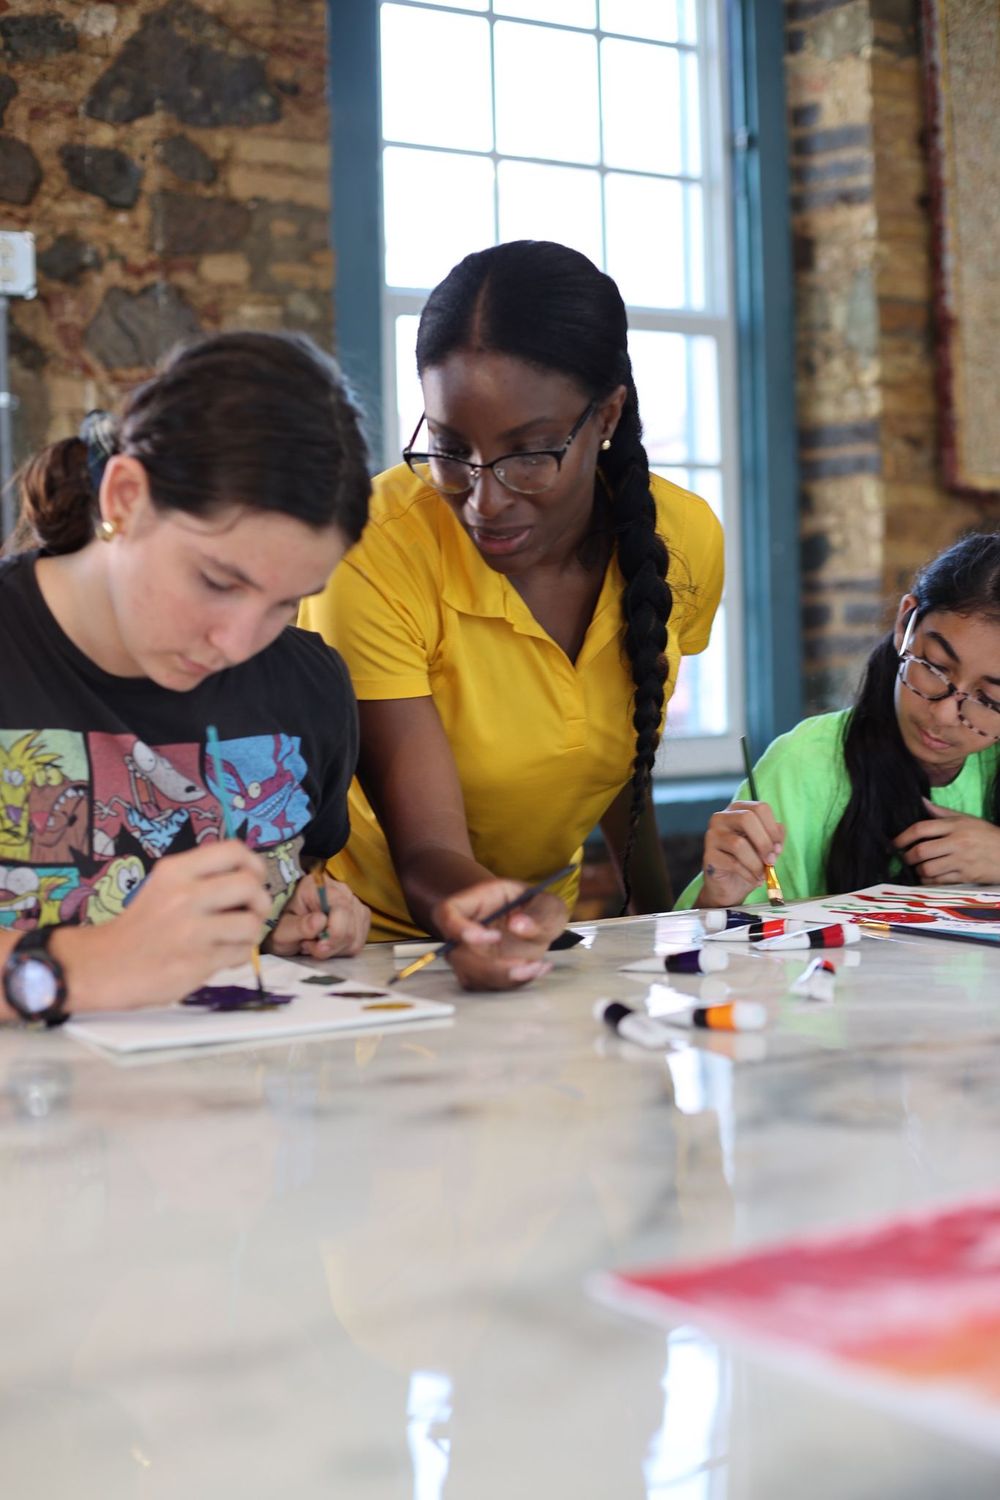 Ages 8-16 - Summer Youth Arts Program- July 15 - August 8